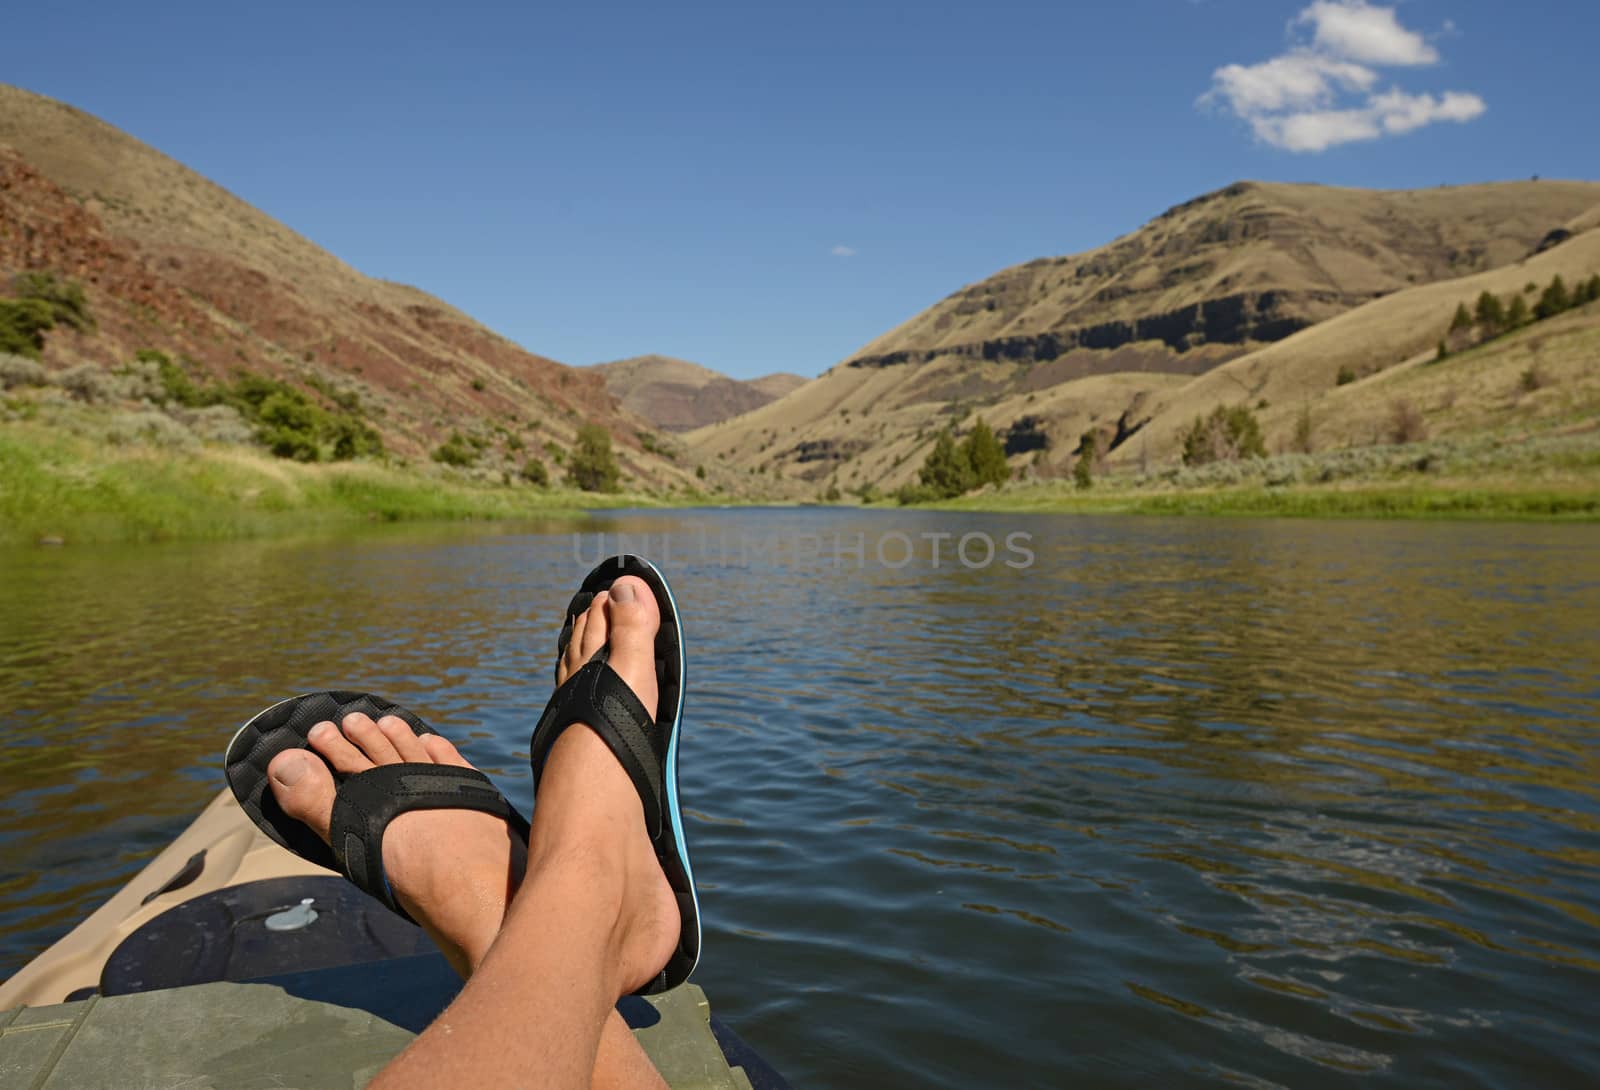 feet up while relaxing during leisure time on a river with mountains 